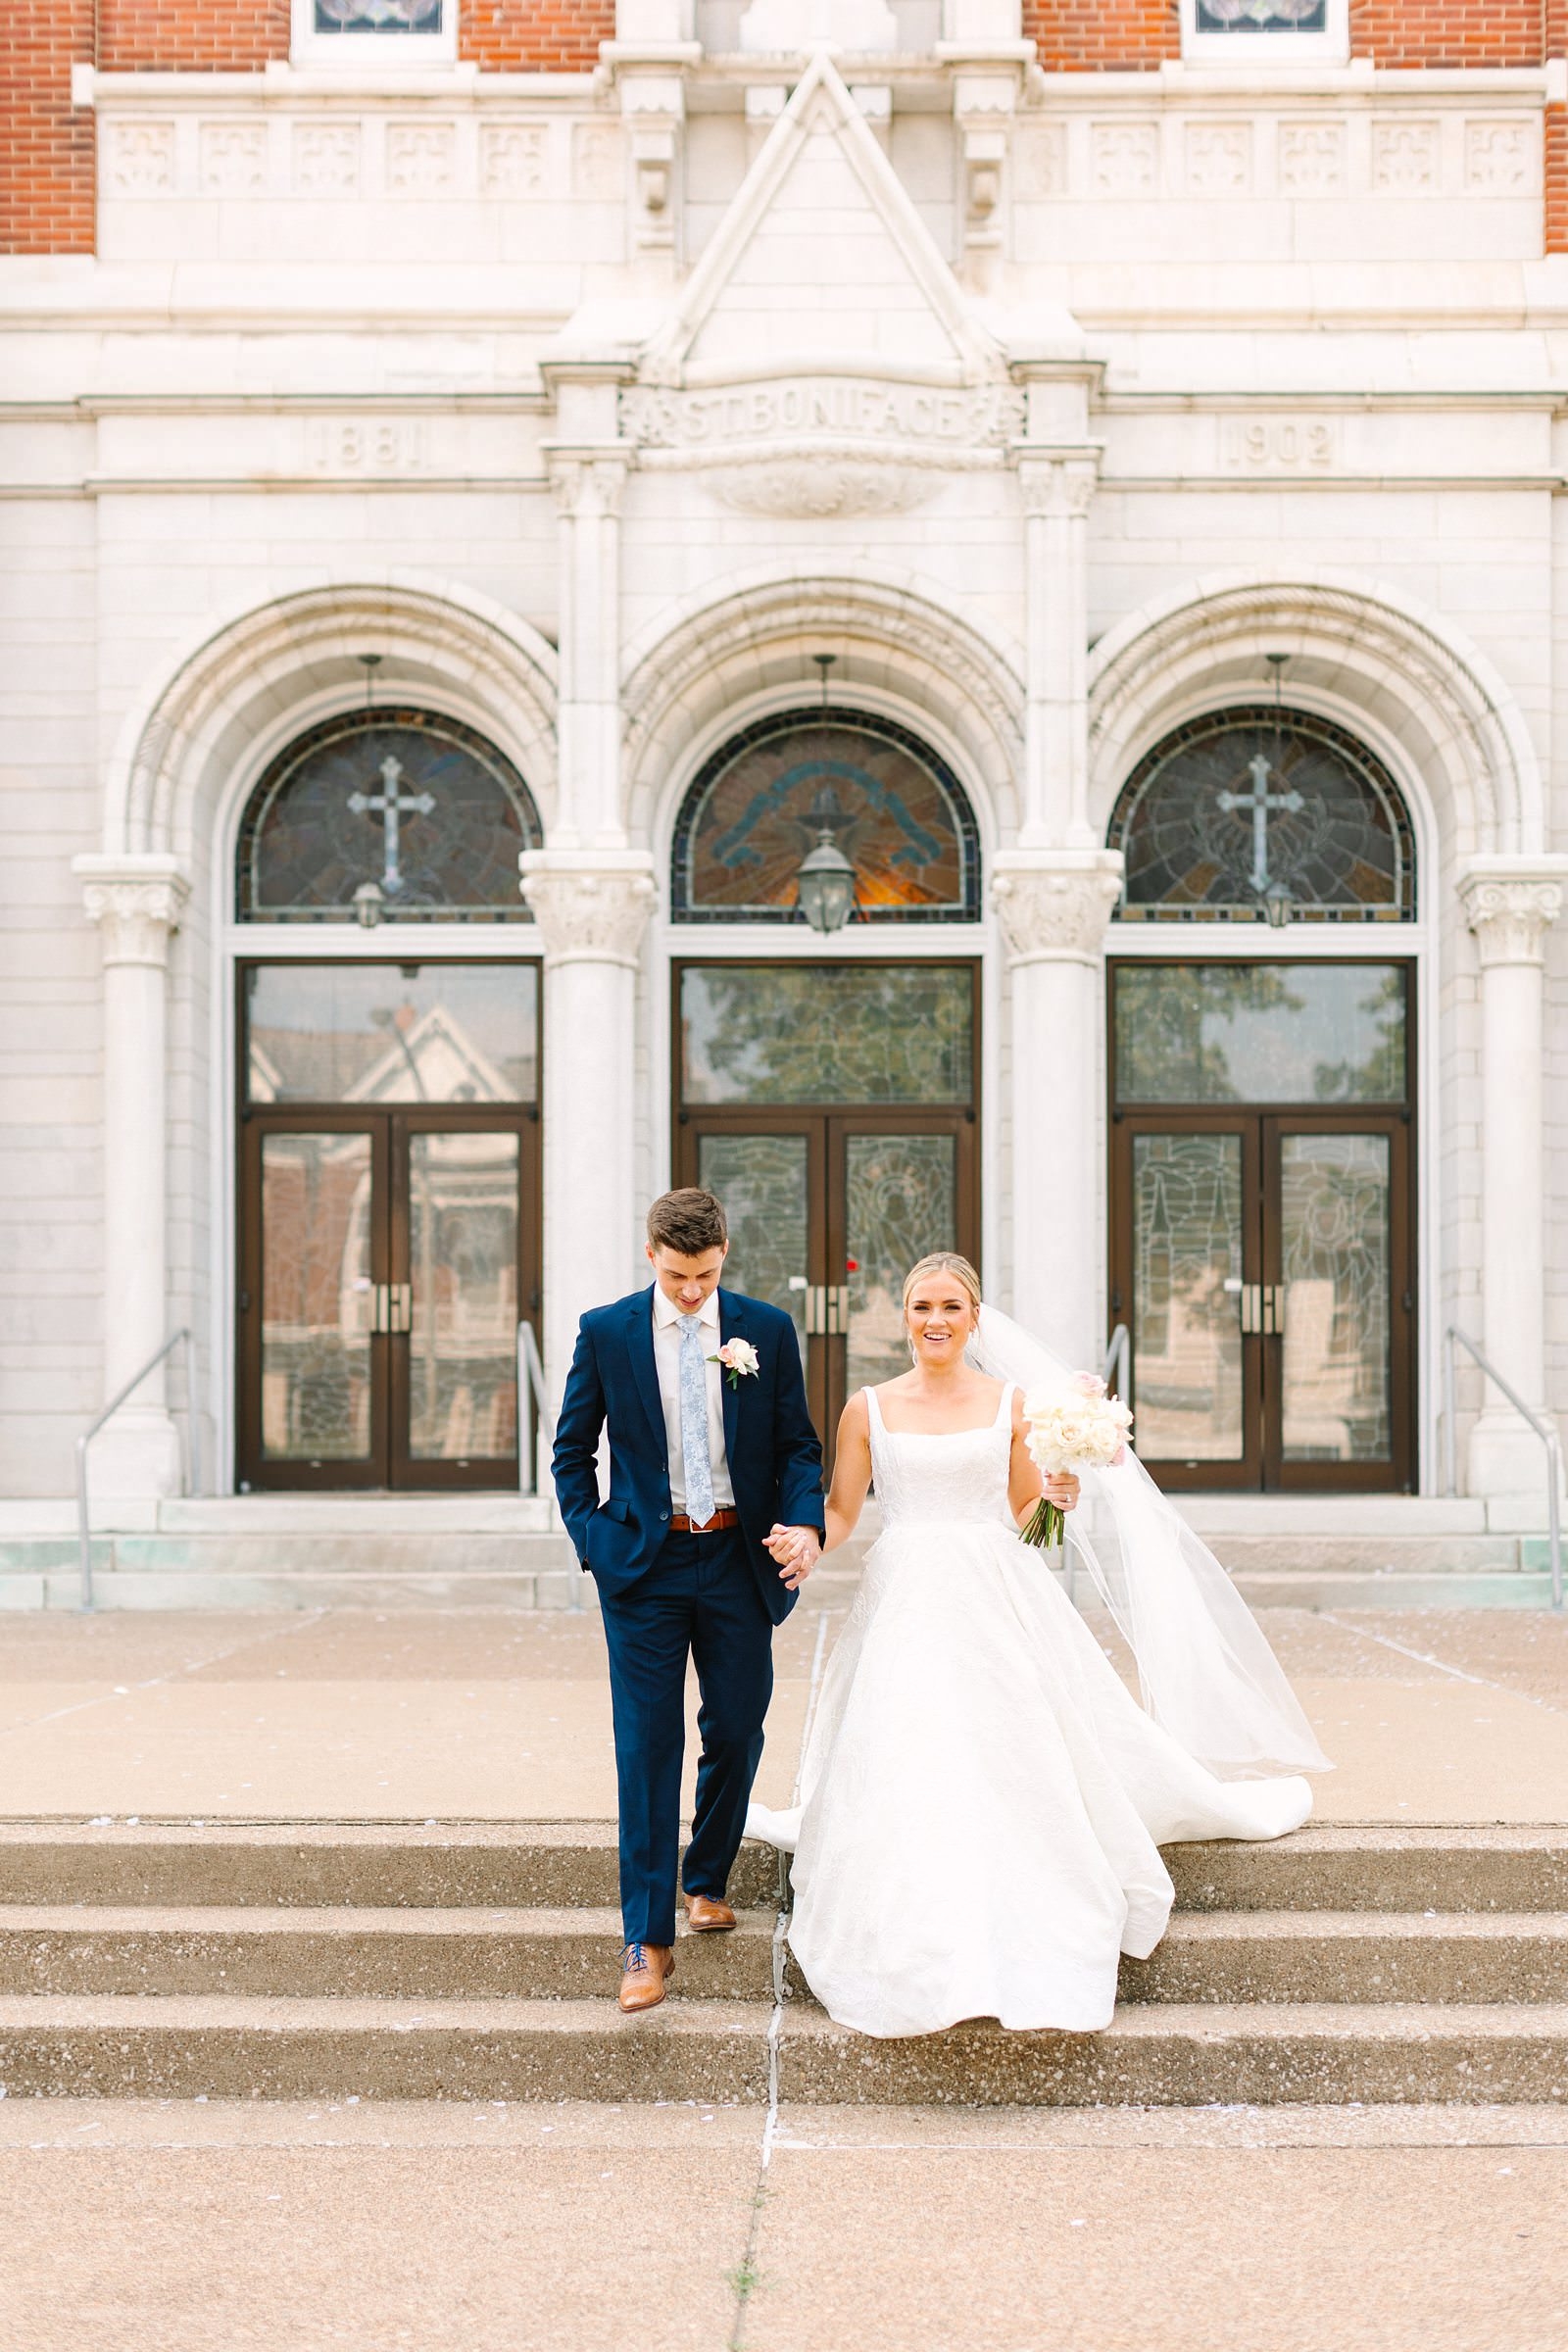 An Evansville Country Club Wedding | Ashley and Beau | Bret and Brandie Photography163.jpg